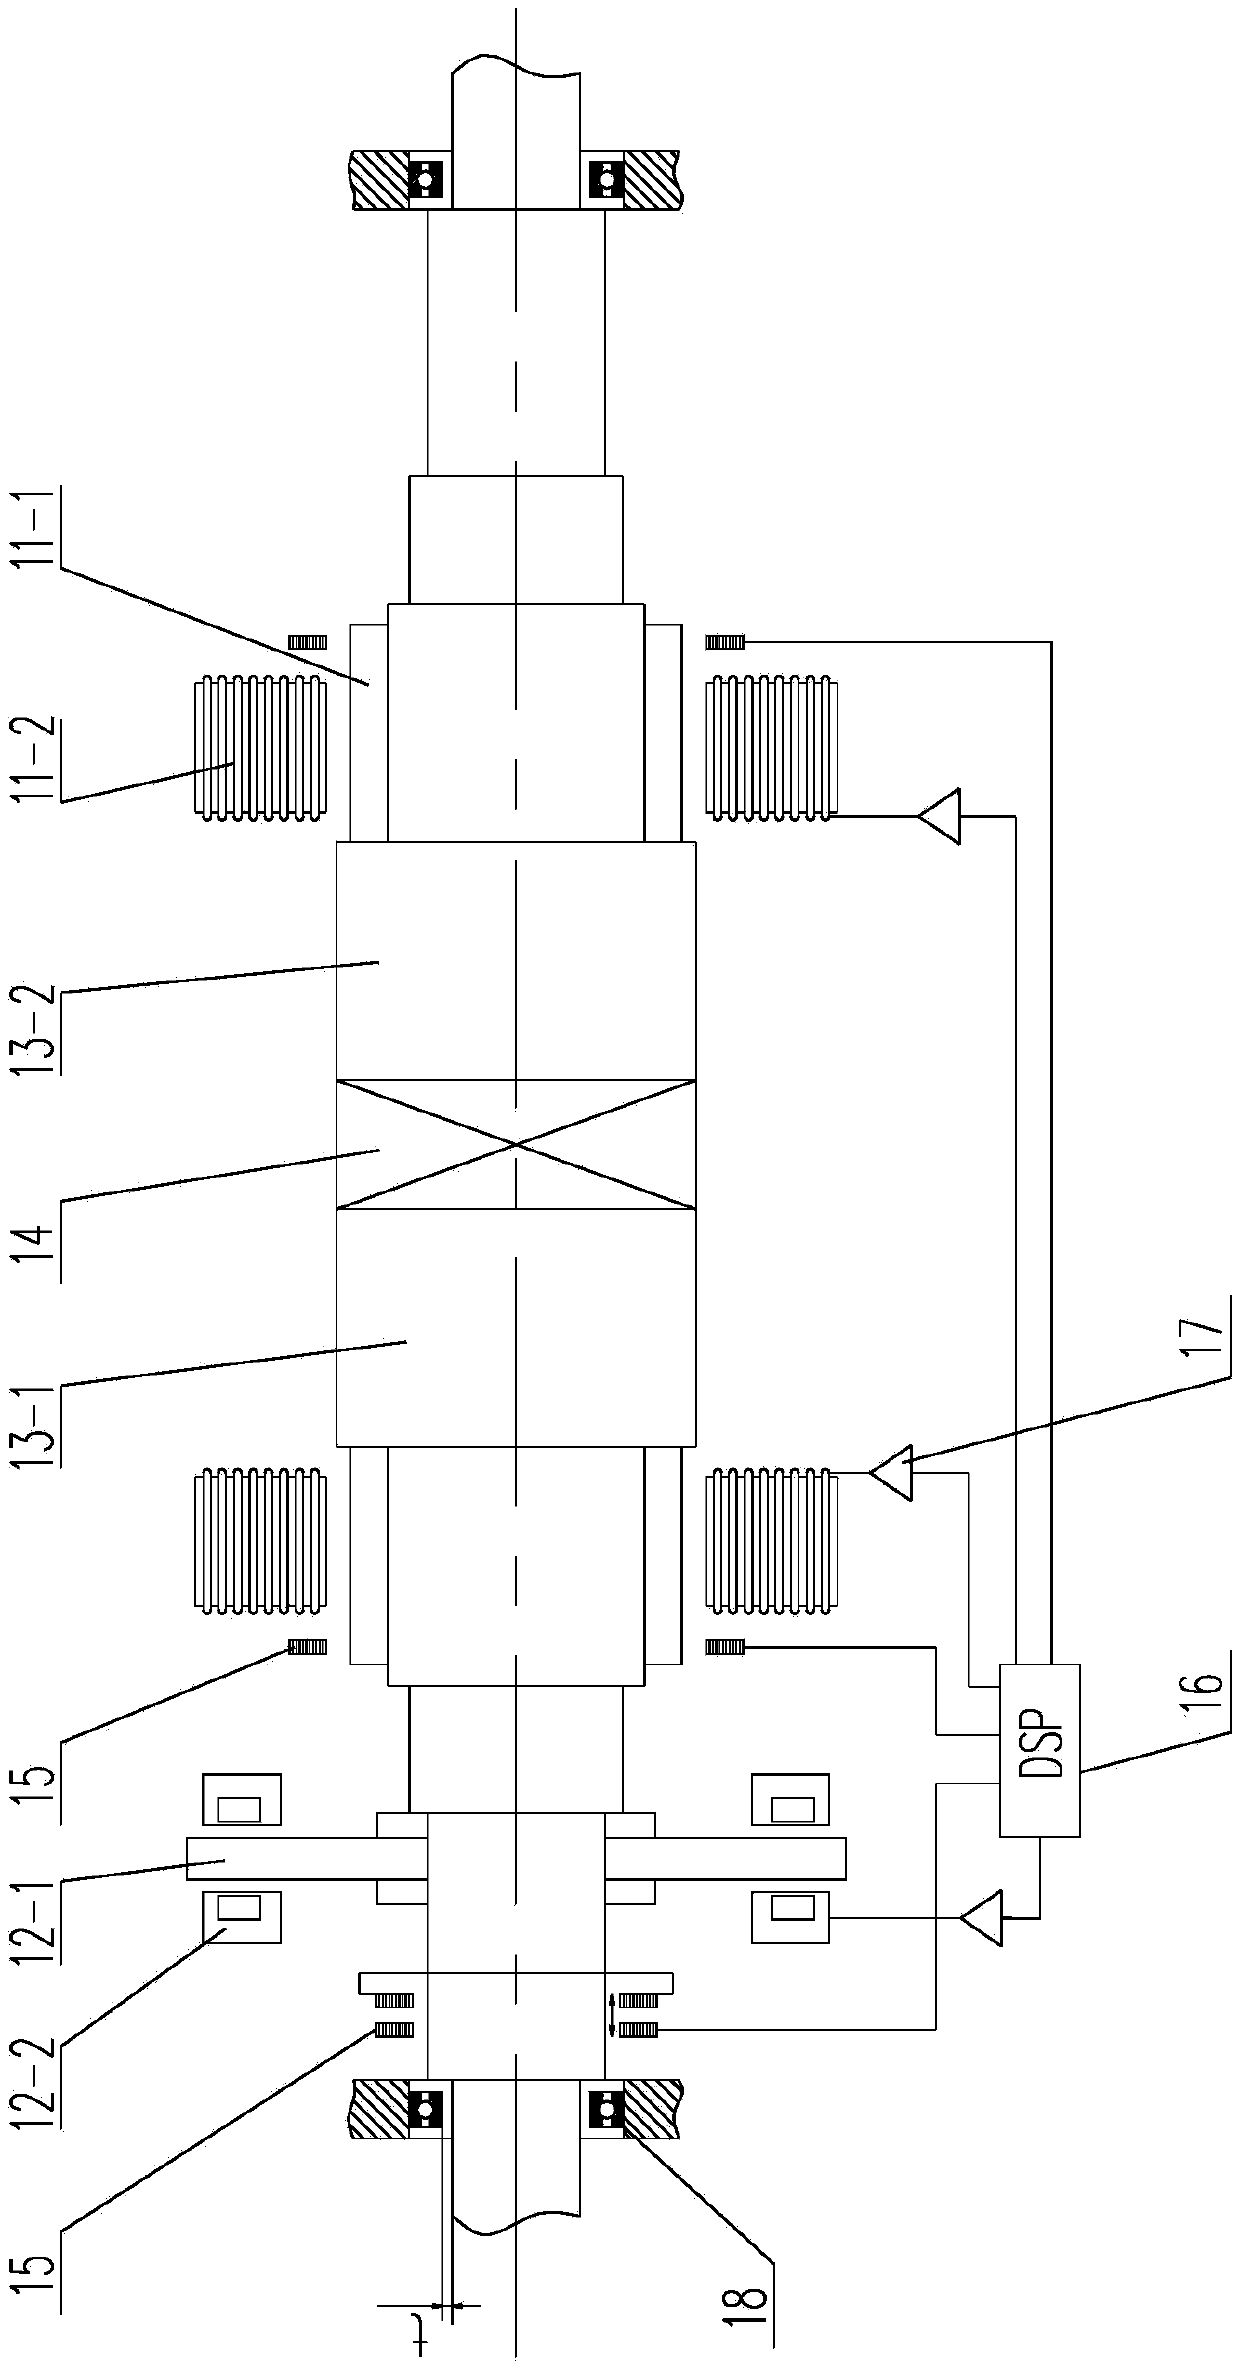 High-speed atomizer based on magnetic suspension bearing permanent magnet synchronous motor